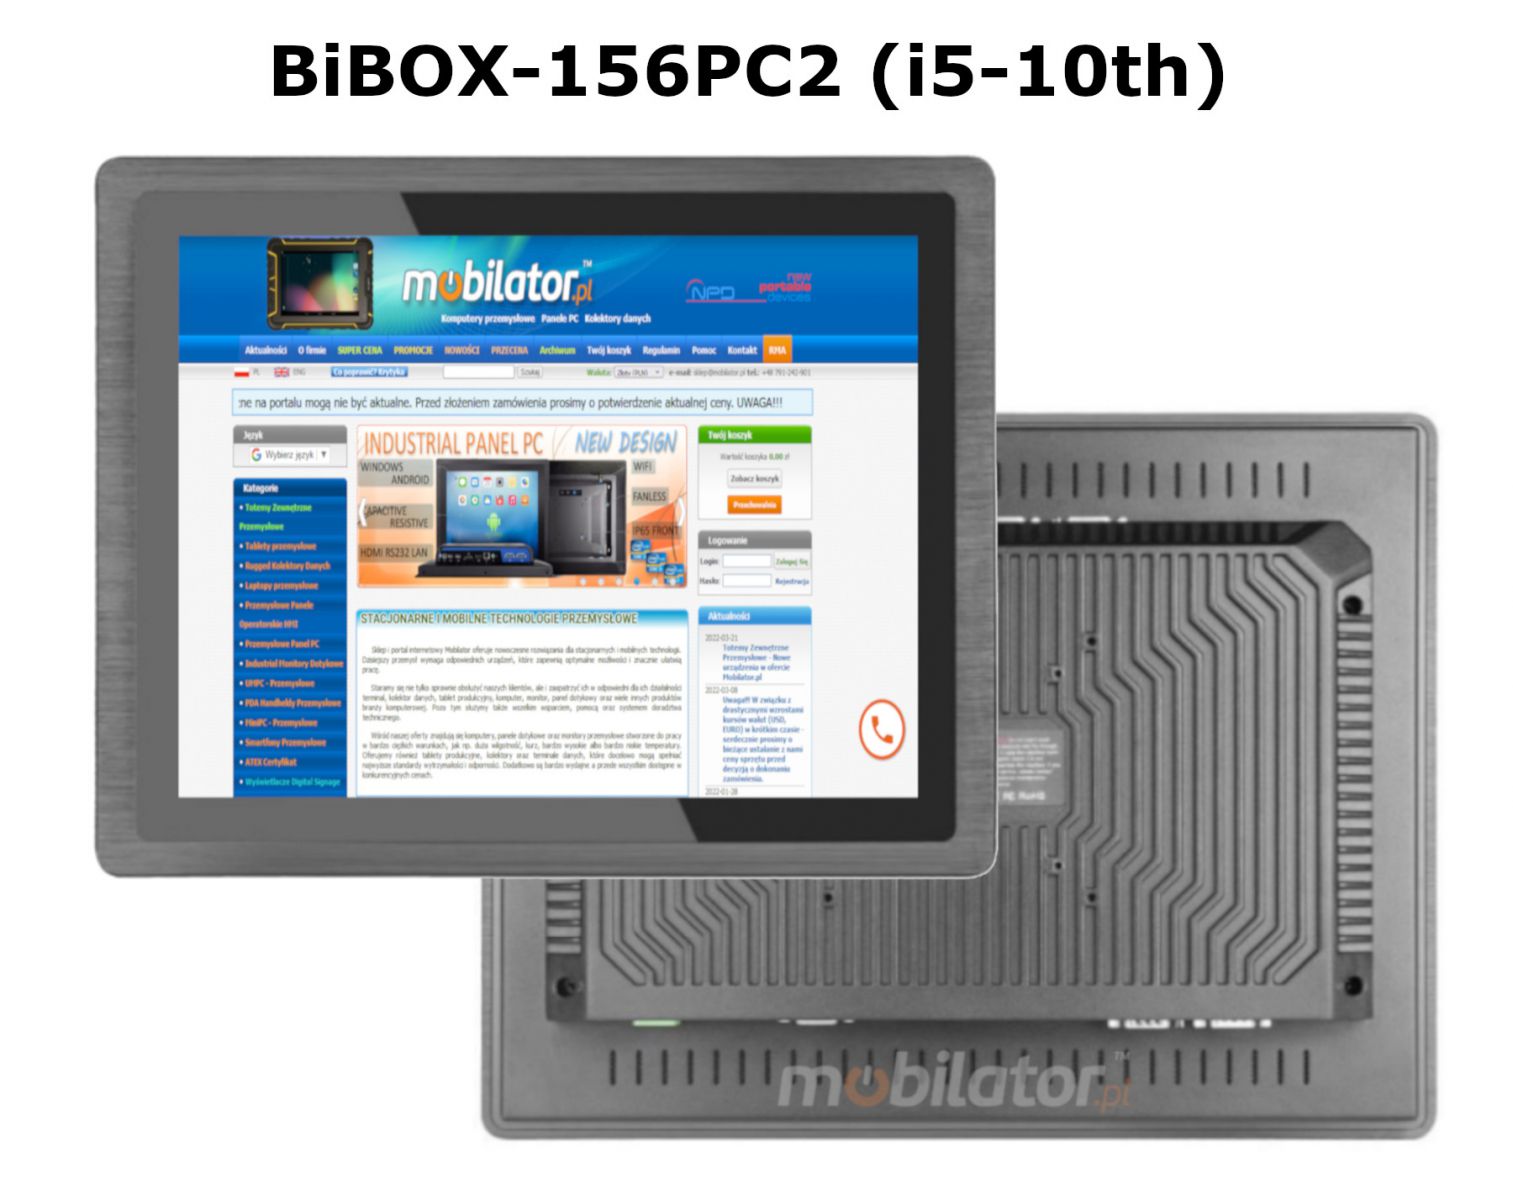 robust and spacious BIBOX-156PC2 panel with WiFi and Bluetooth